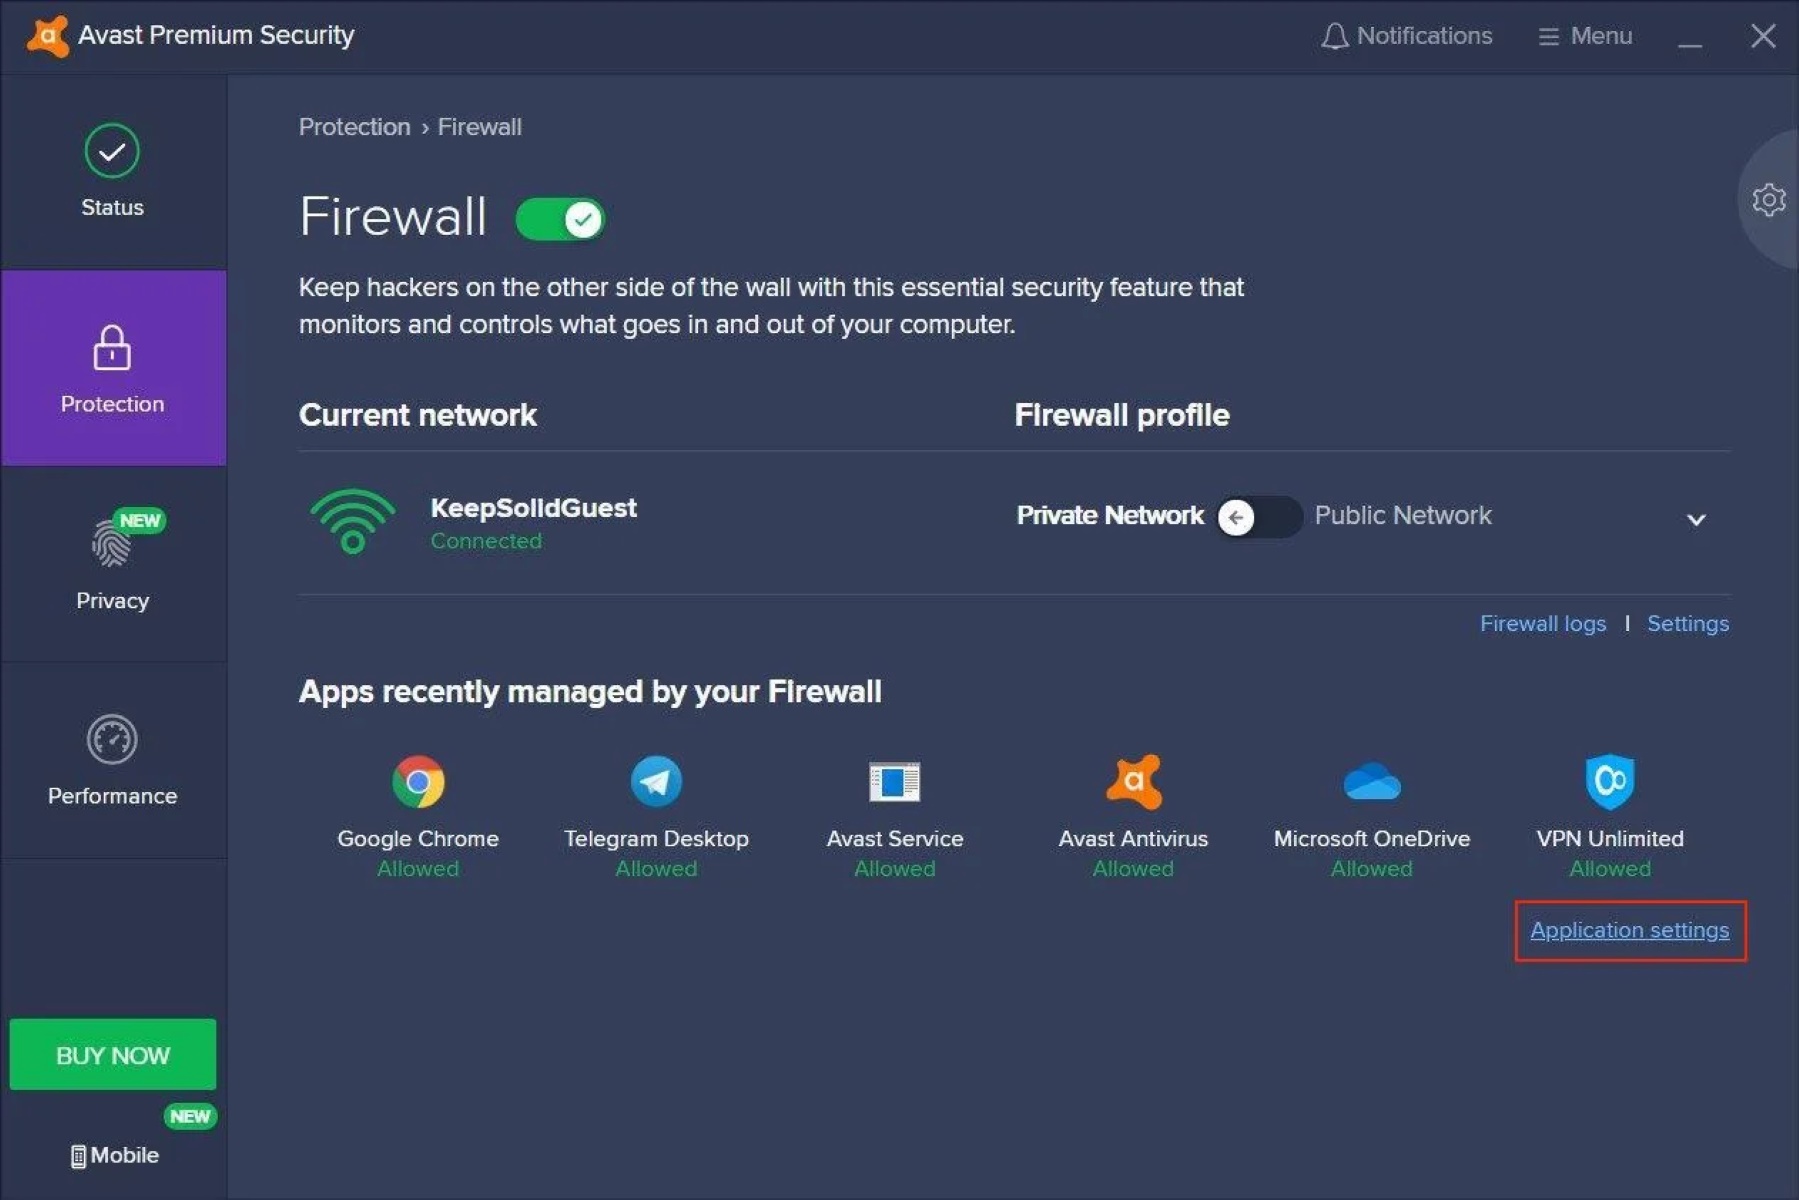 How To Add An Exception To Avast Firewall